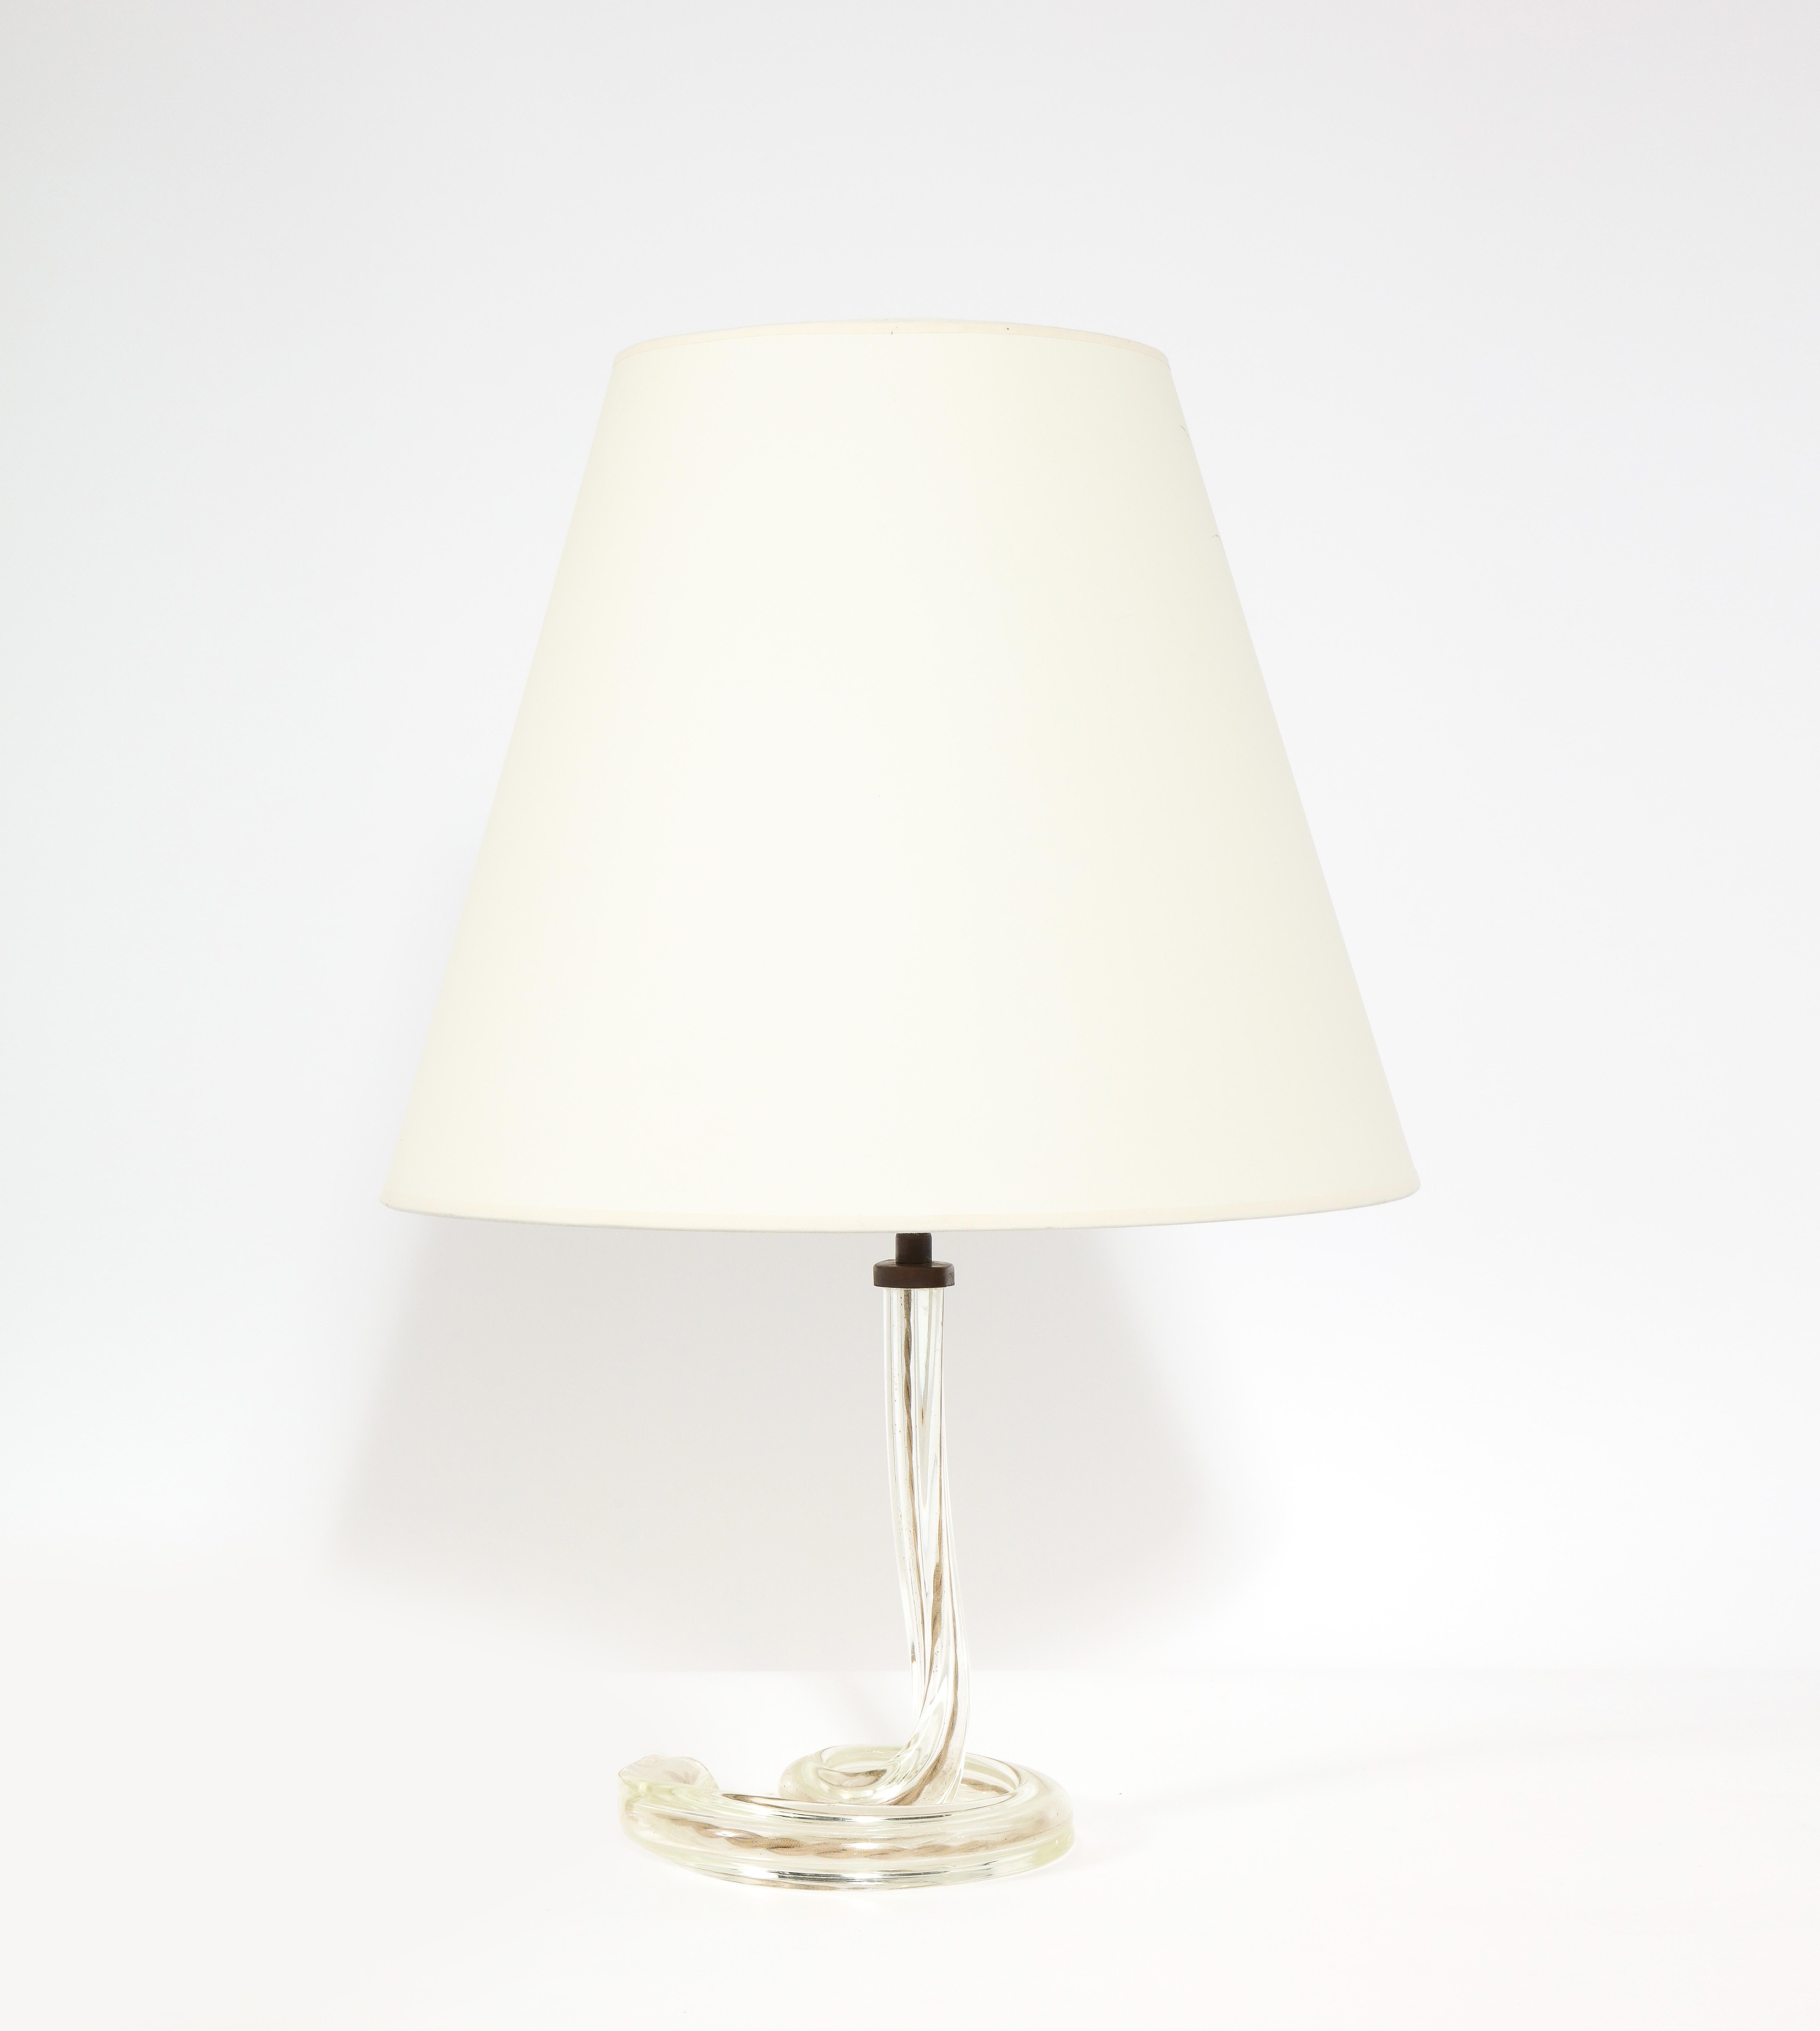 Elegant twisted Murano glass rod table lamp with brass accents. Shade is for photographic purposes.